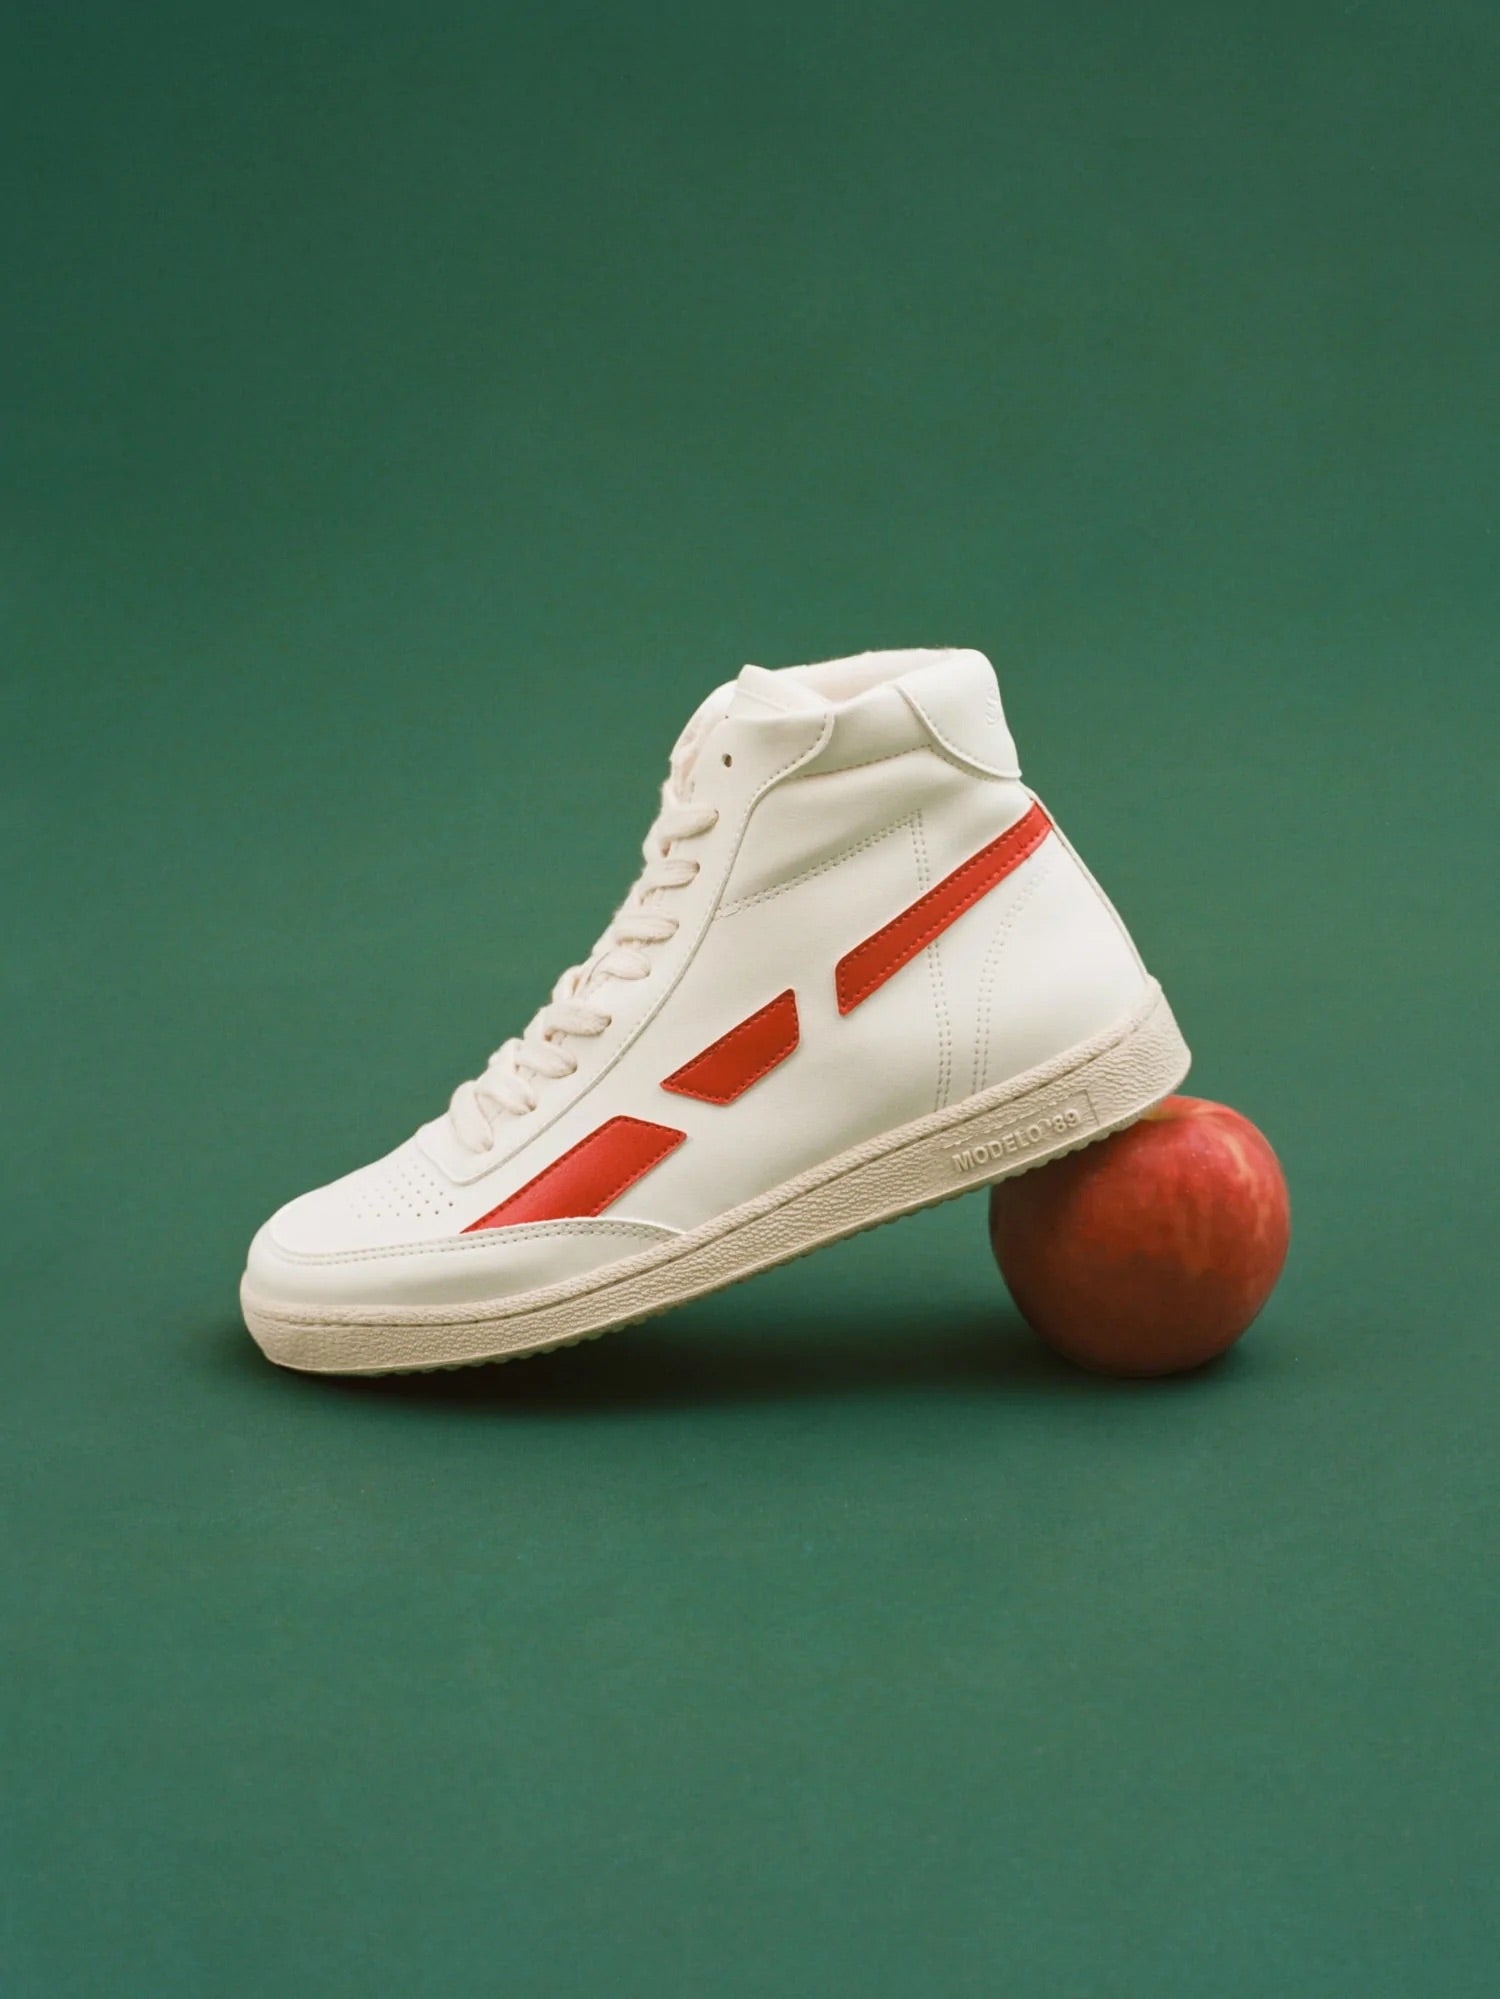 A white high top sneaker with vegan leather on top of a SAYE Modelo '89 Hi Sneakers - Apple.